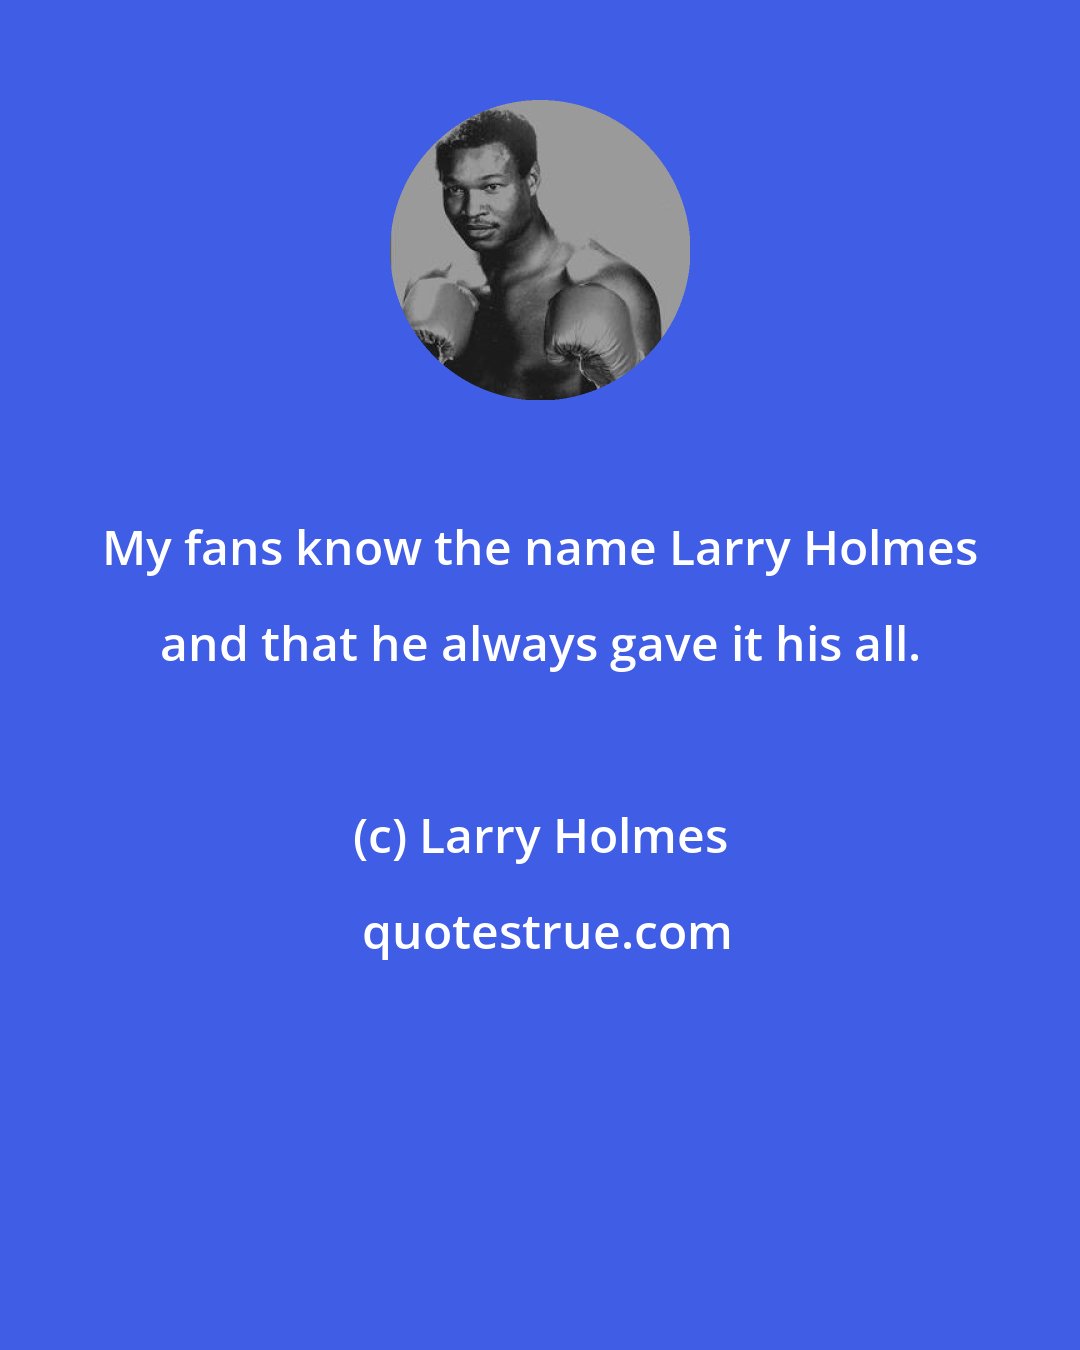 Larry Holmes: My fans know the name Larry Holmes and that he always gave it his all.